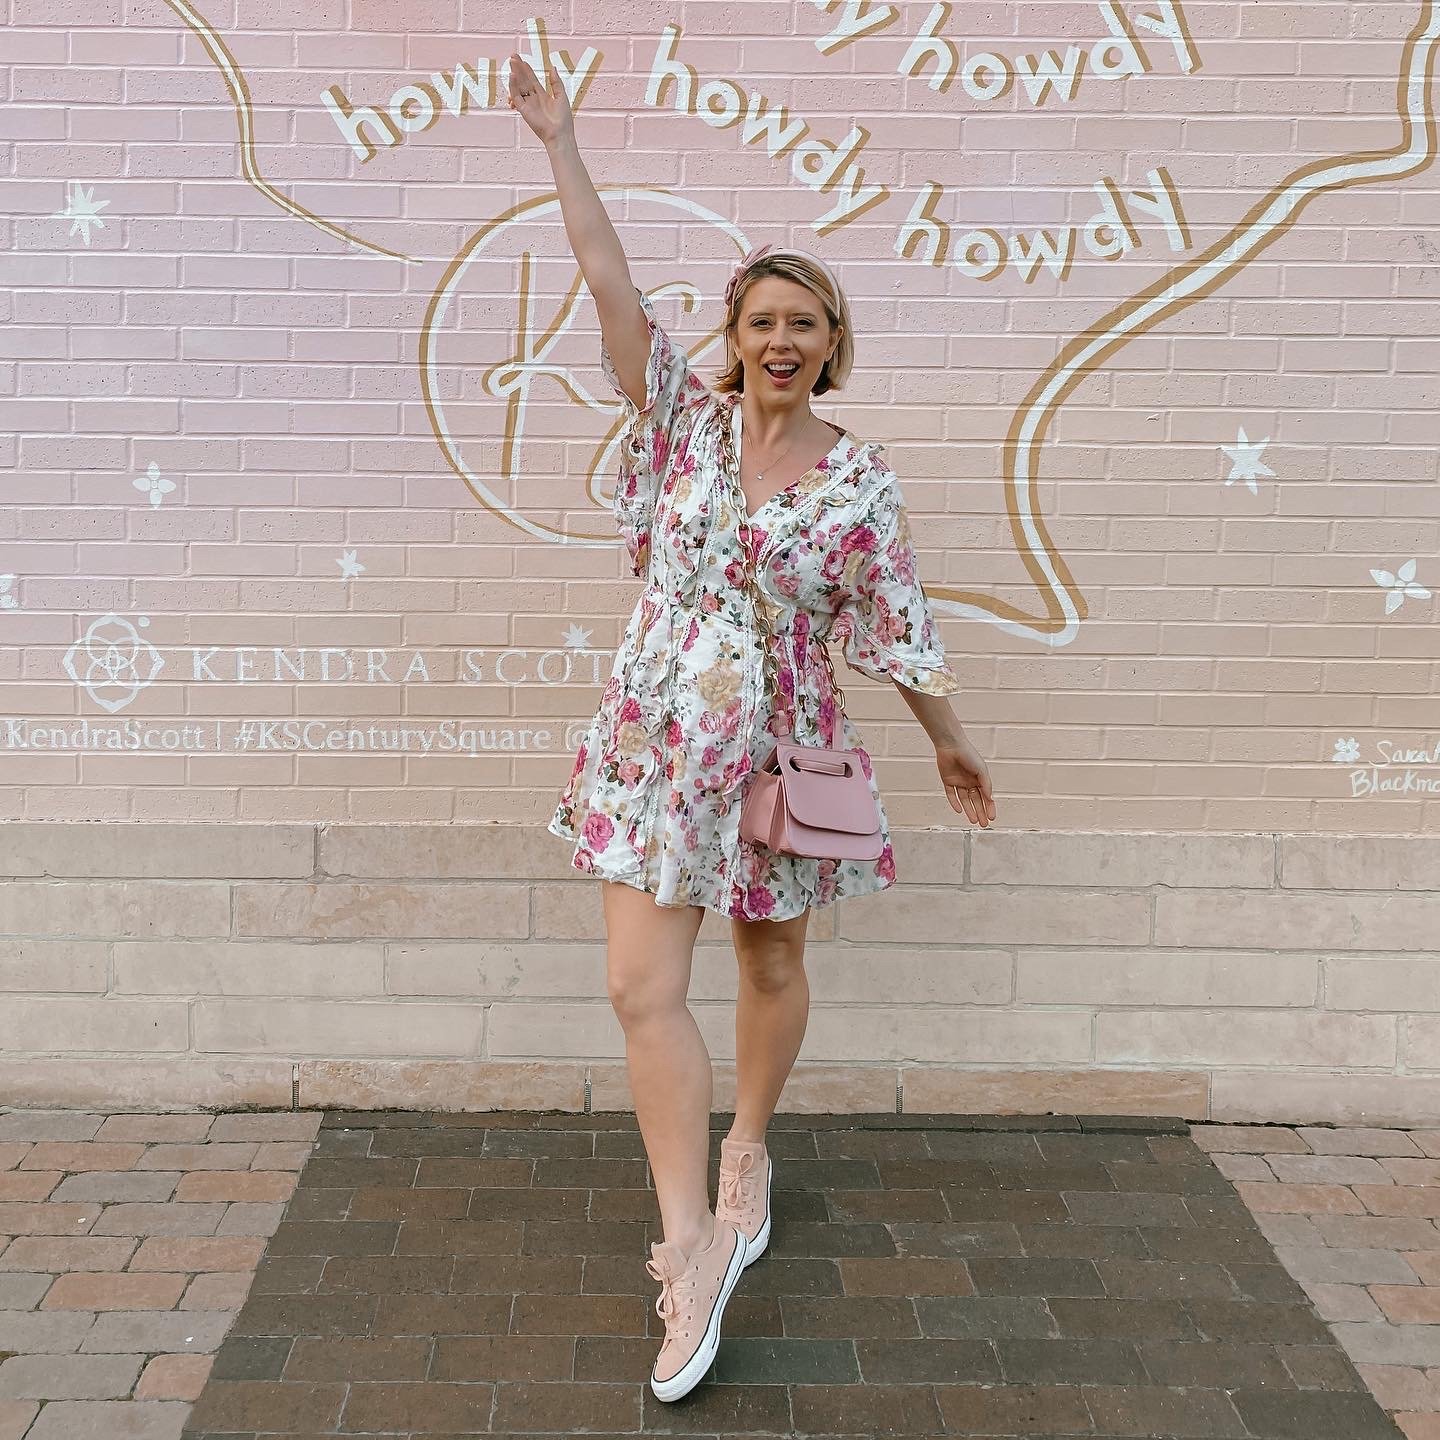 Three Heel Clicks - How to Wear Converse Sneakers with a Dress